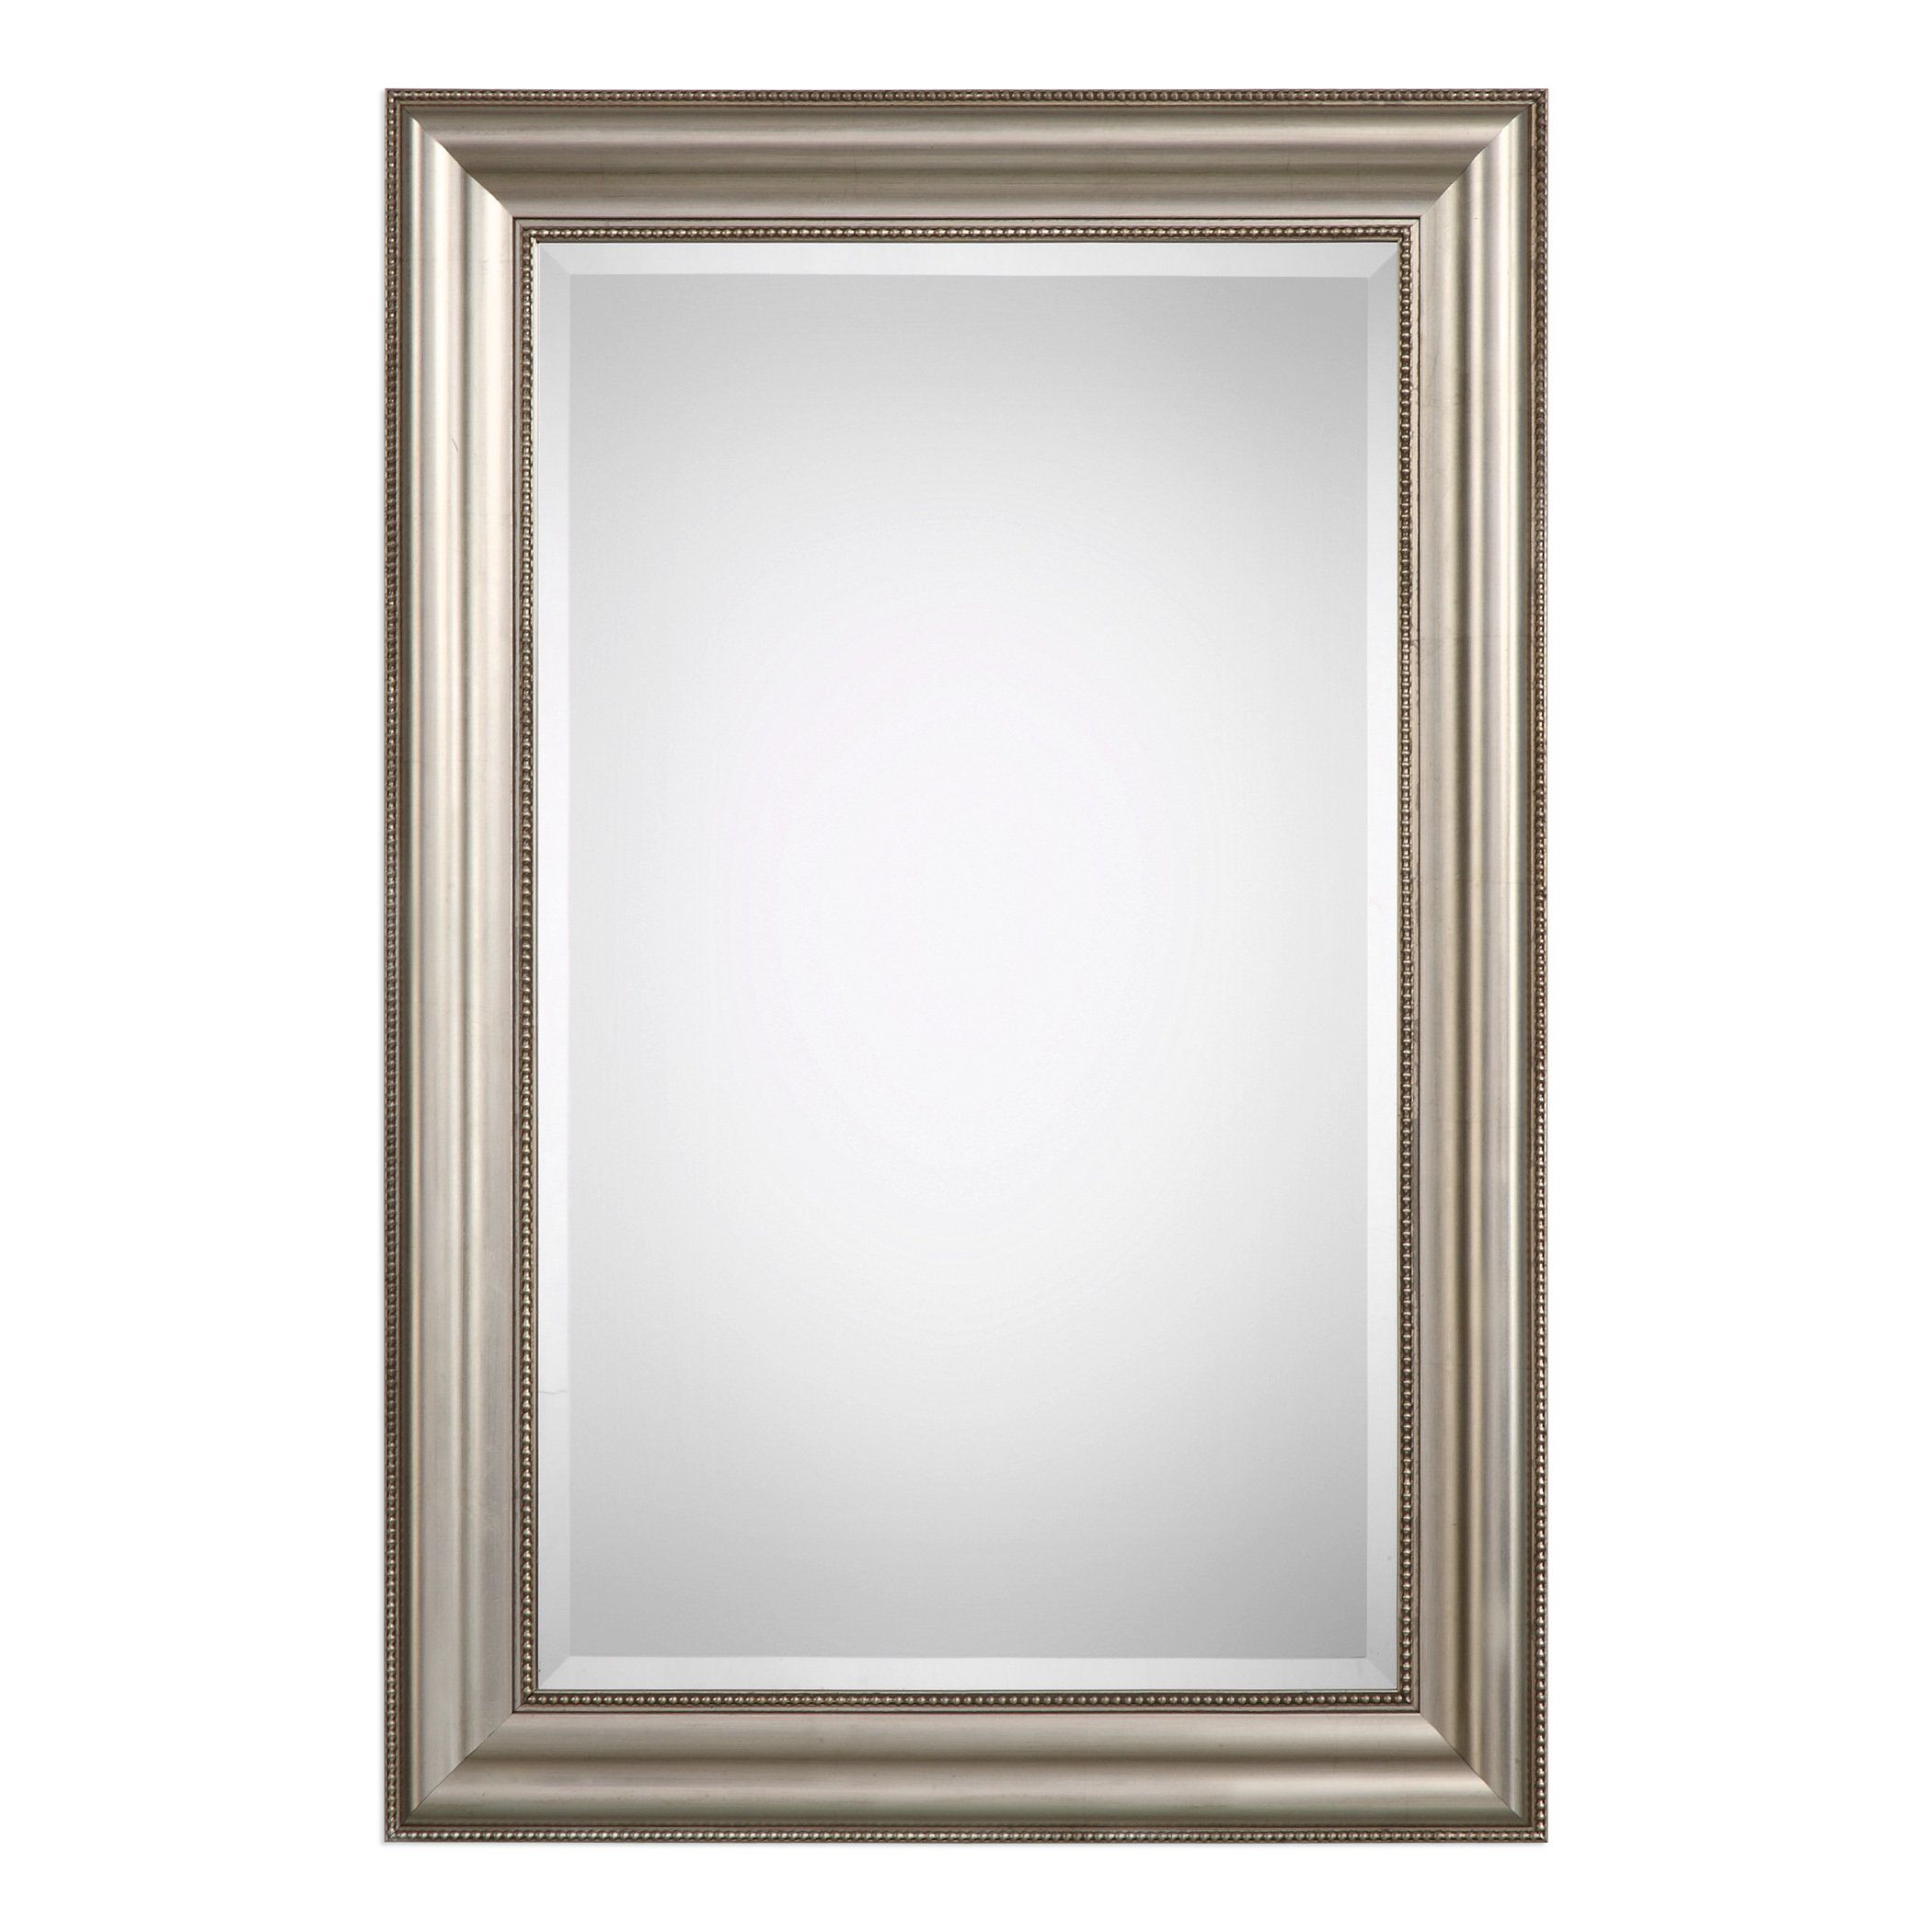 Farmhouse Mirrors | Birch Lane Intended For Polito Cottage/country Wall Mirrors (View 18 of 20)